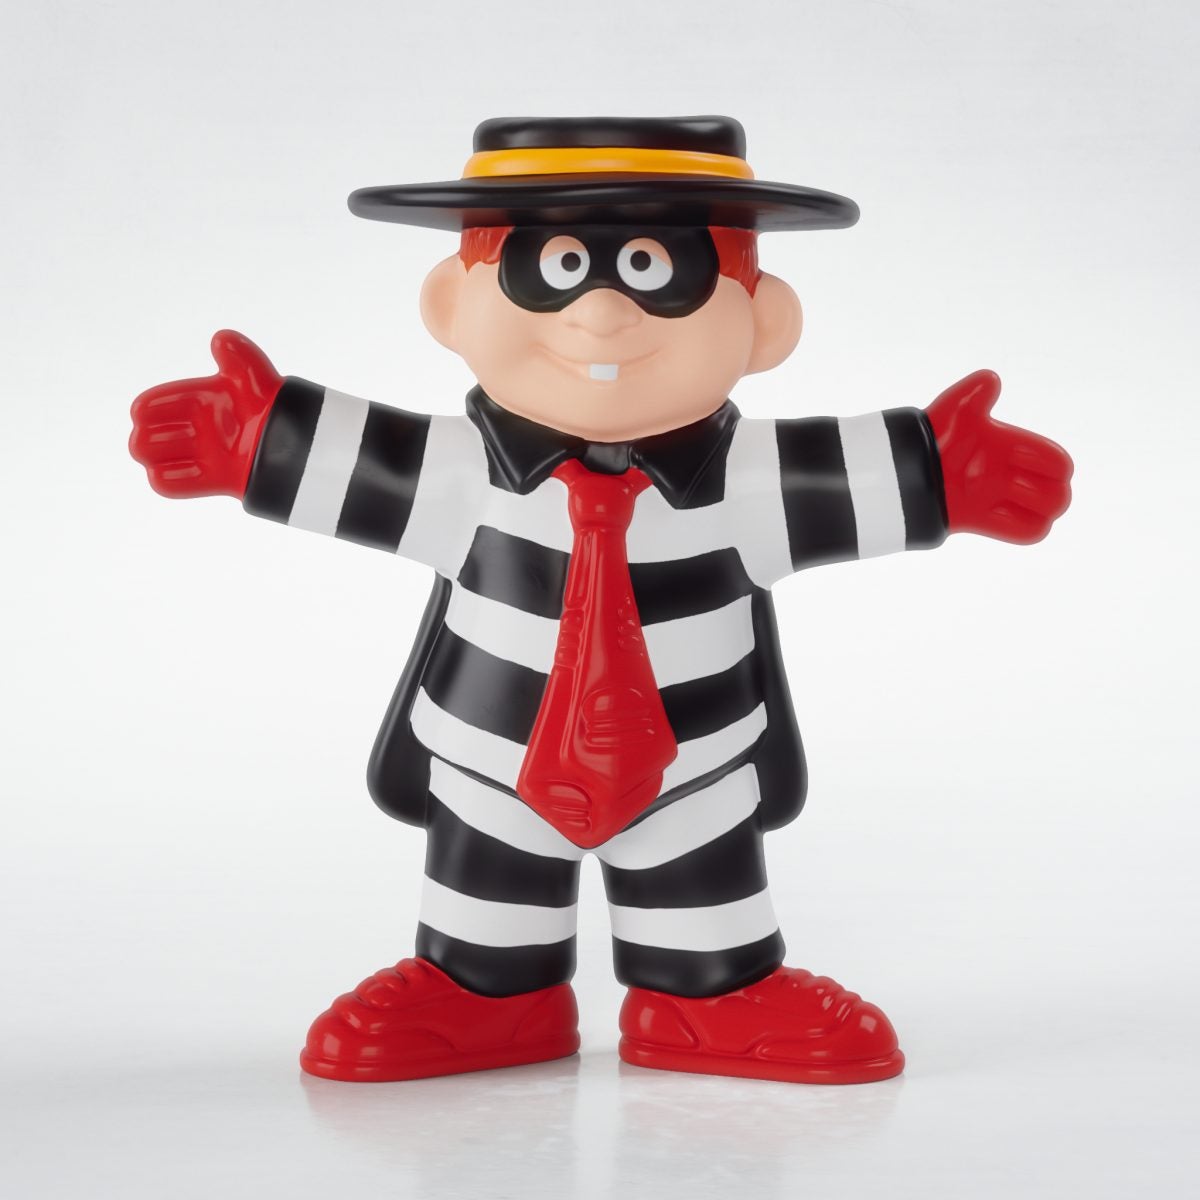 Iconic Mcdonald's Happy Meal Toys From Our Childhood Available From Nov 28 &Amp; We're Feeling Nostalgic - World Of Buzz 16